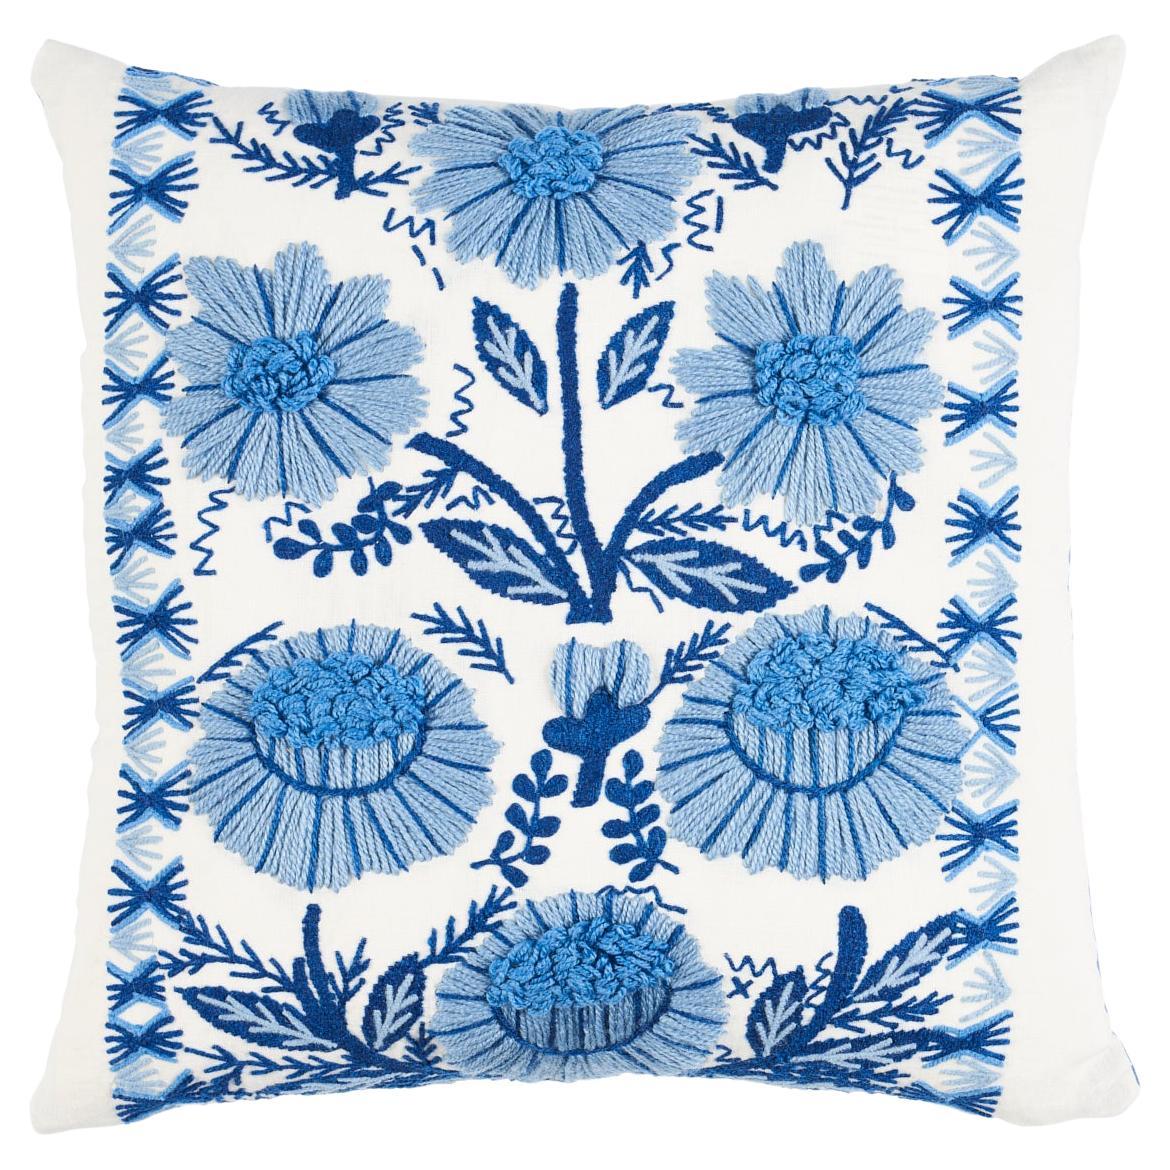 Shumacher Marguerite Embroidery 20" Pillow in Sky